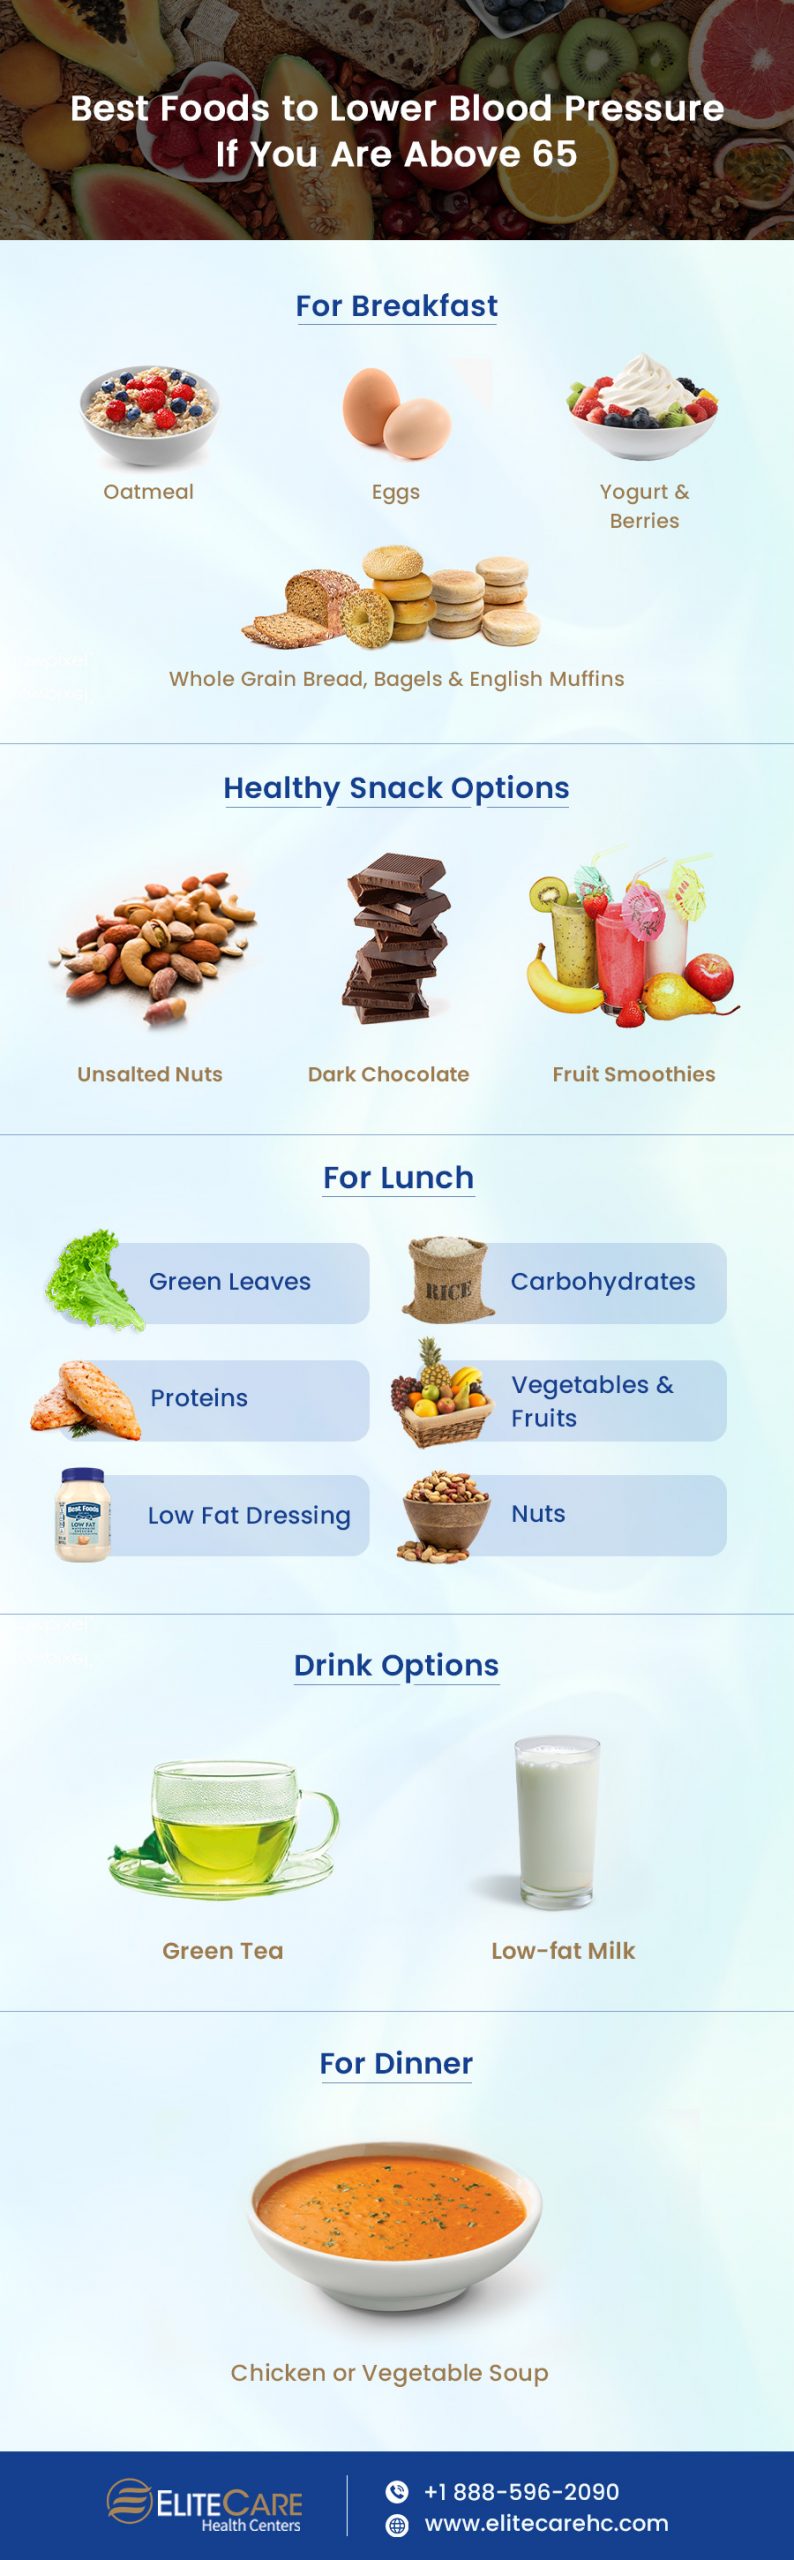 Best Foods to Lower Blood Pressure If You Are Above 65 | Infographic